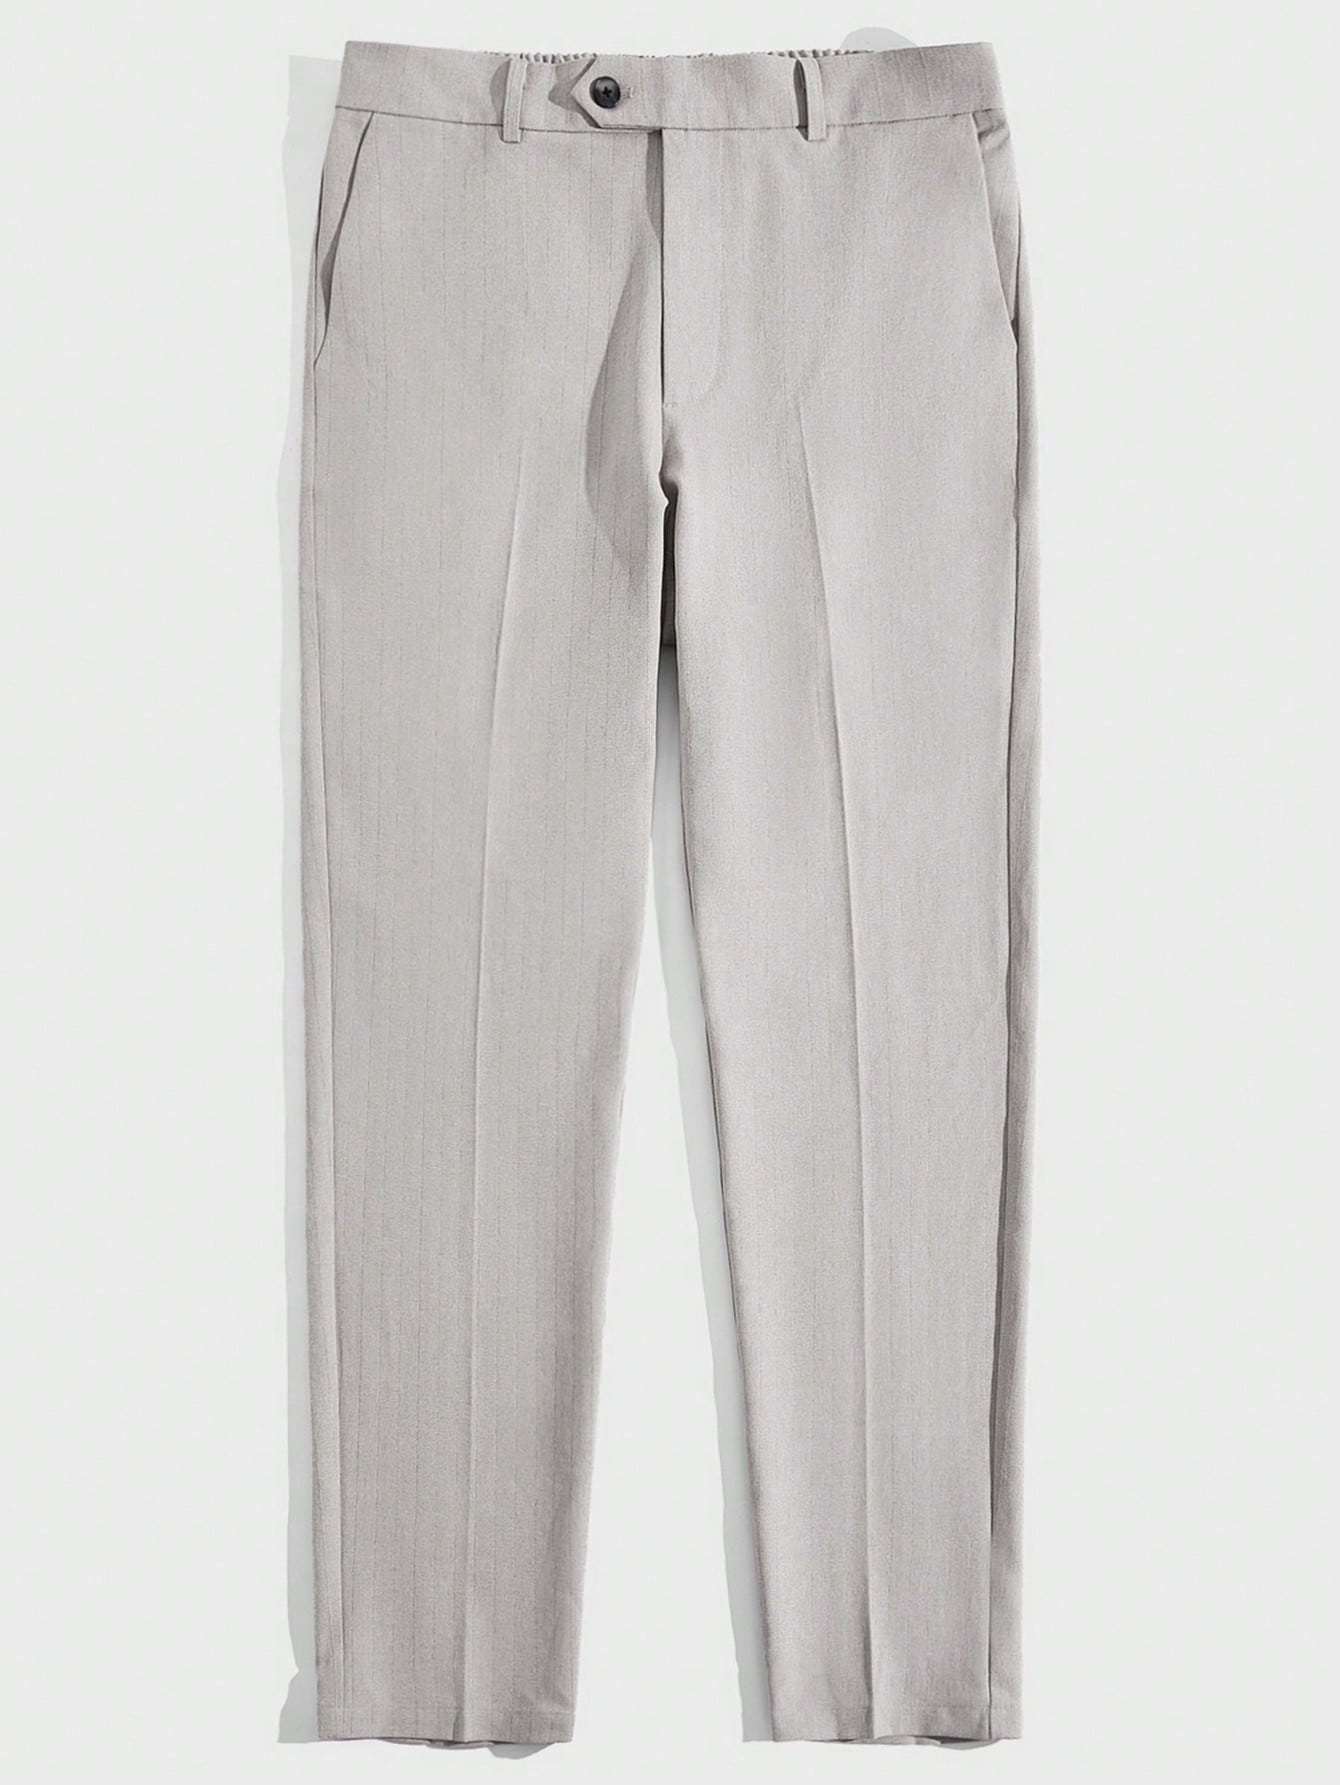 Woven Solid Color Versatile Suit Trousers For Everyday Wear